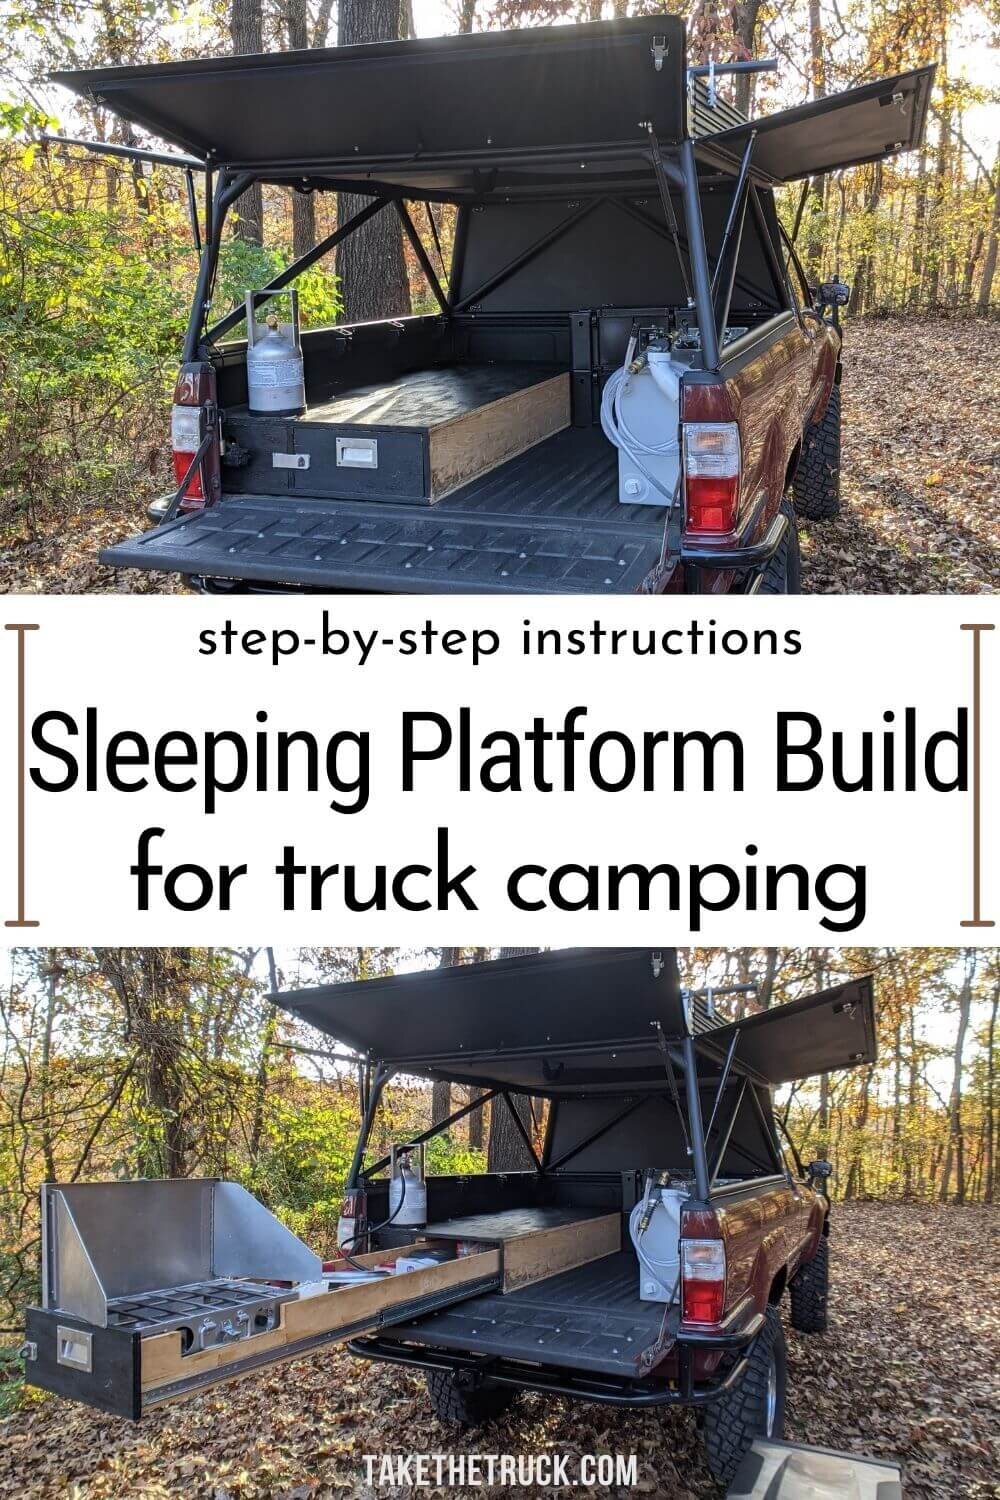 How to Build a Homemade DIY Truck Camper | Take The Truck